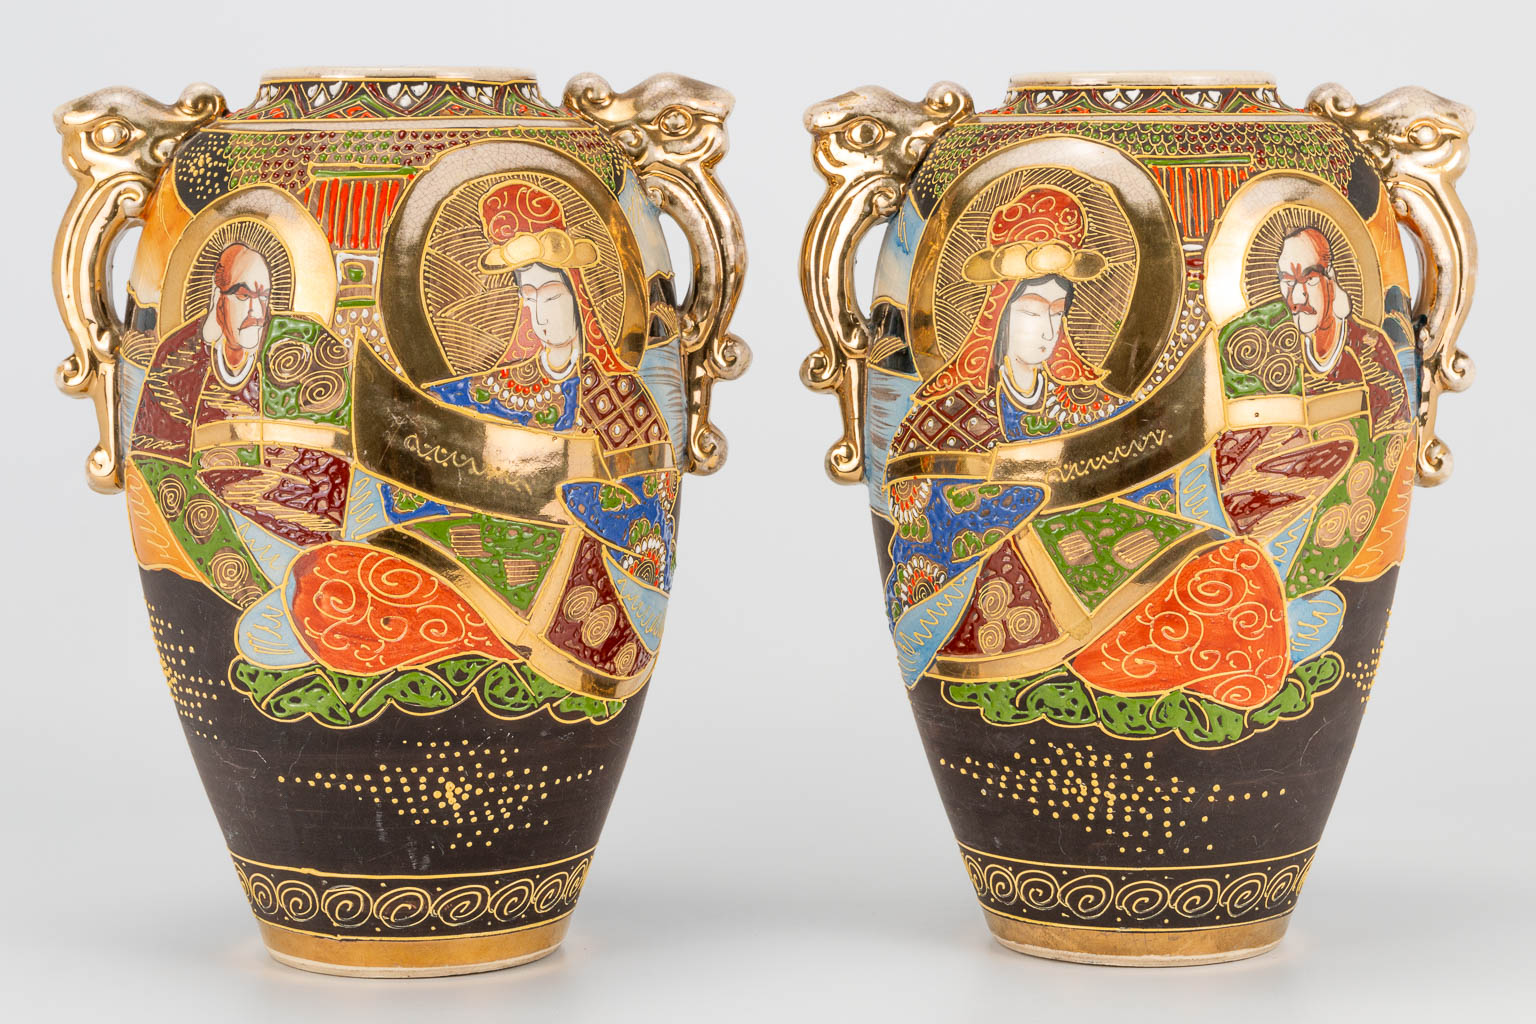 A collection of 3 Satsuma vases made in Japan. One vase and a pair. (38 x 21 cm) - Image 24 of 28